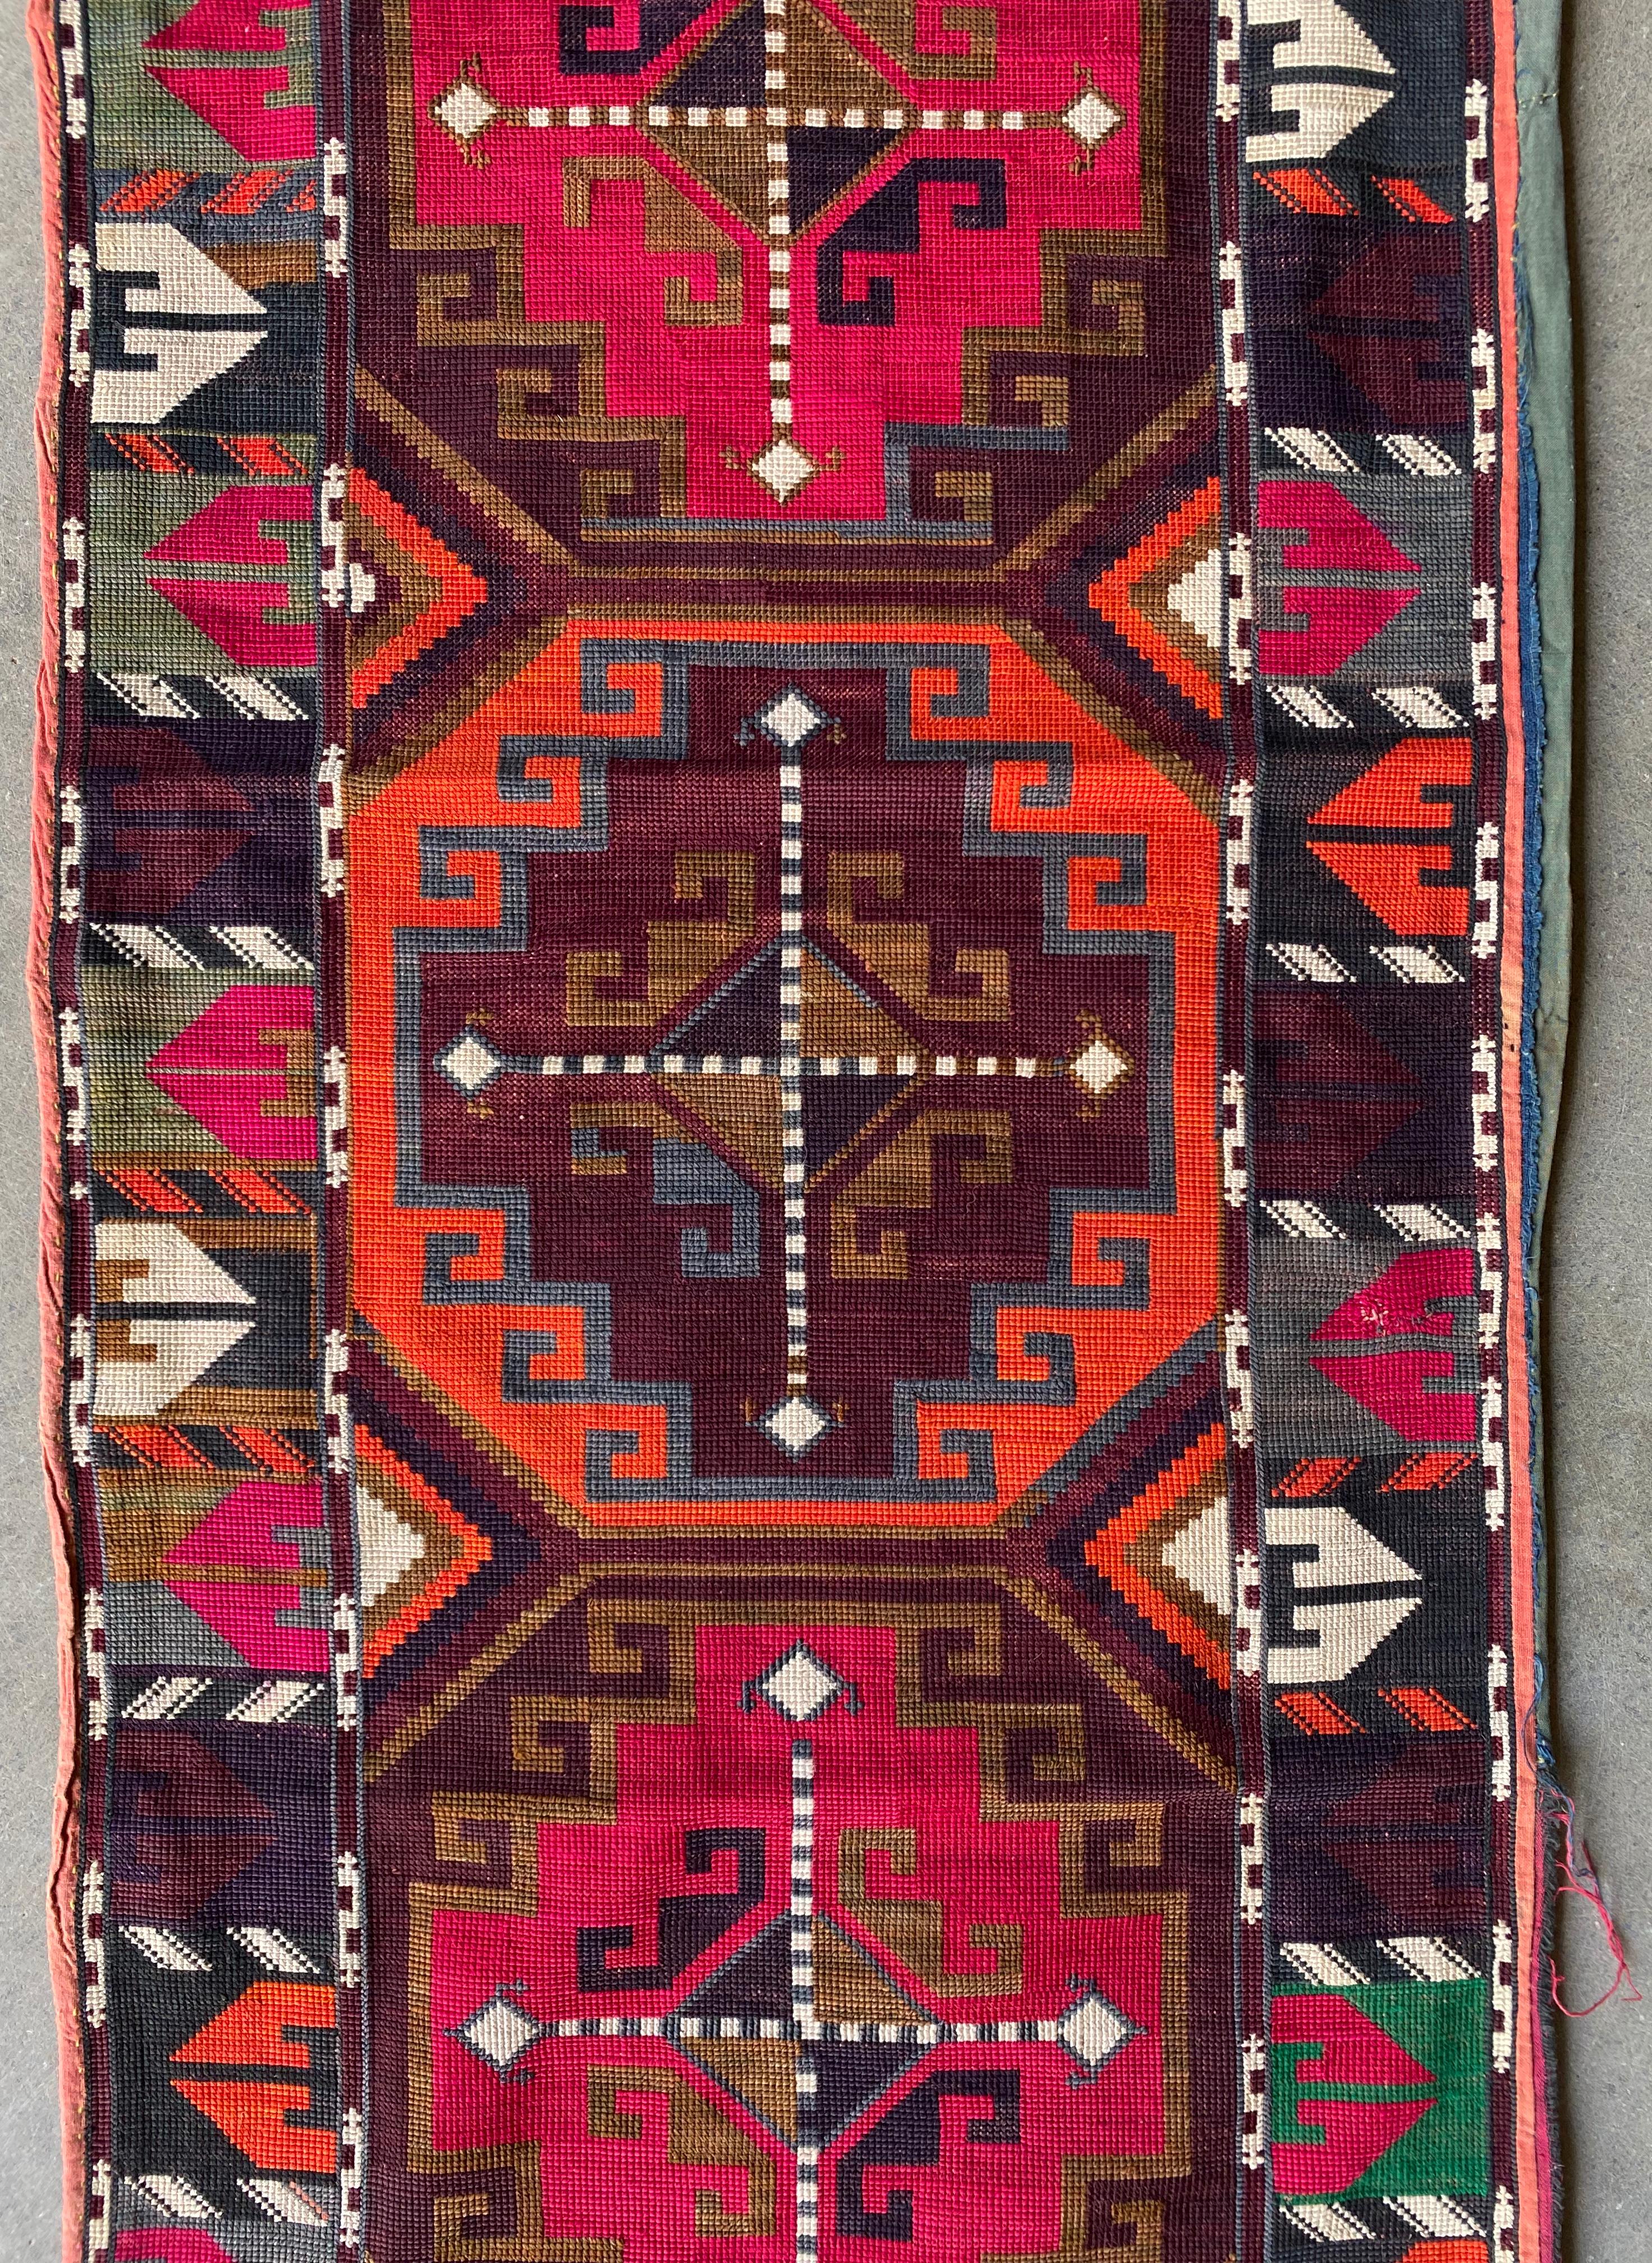 Other Central Asian Embroidered Textile, “Suzani”, Mid 20th Century For Sale